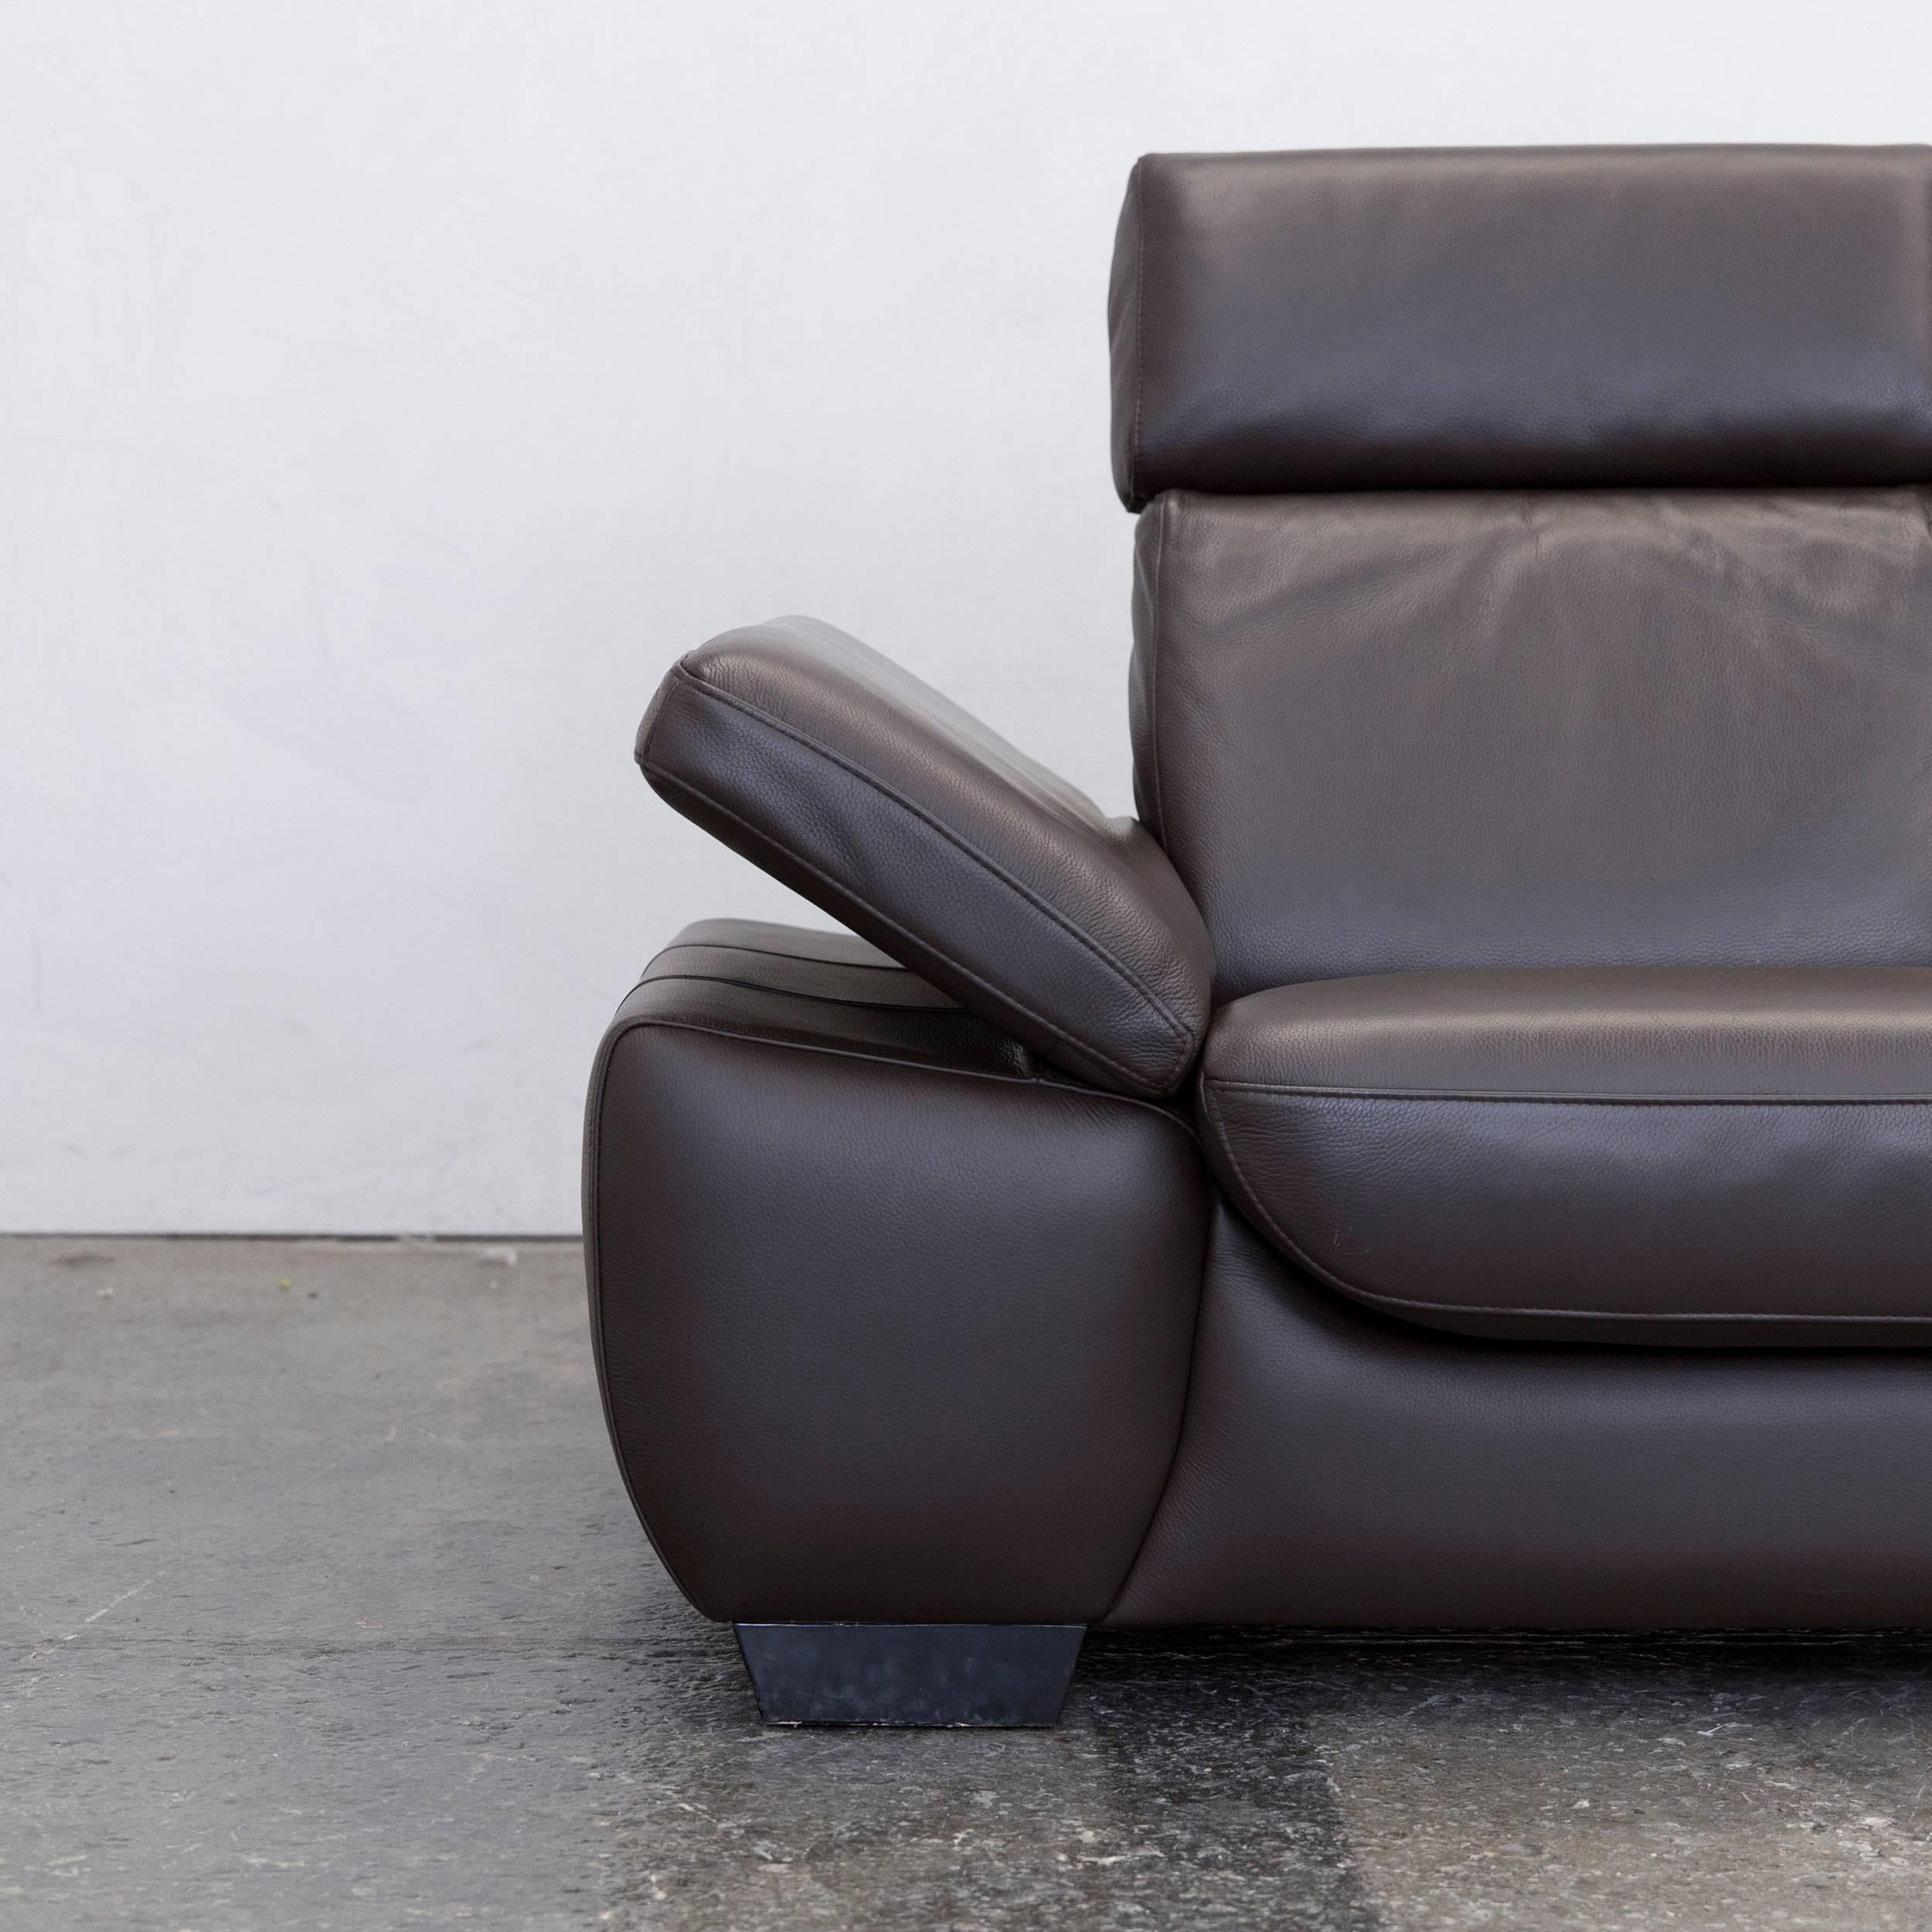 Modern leather two-seat couch in brown with recline function.